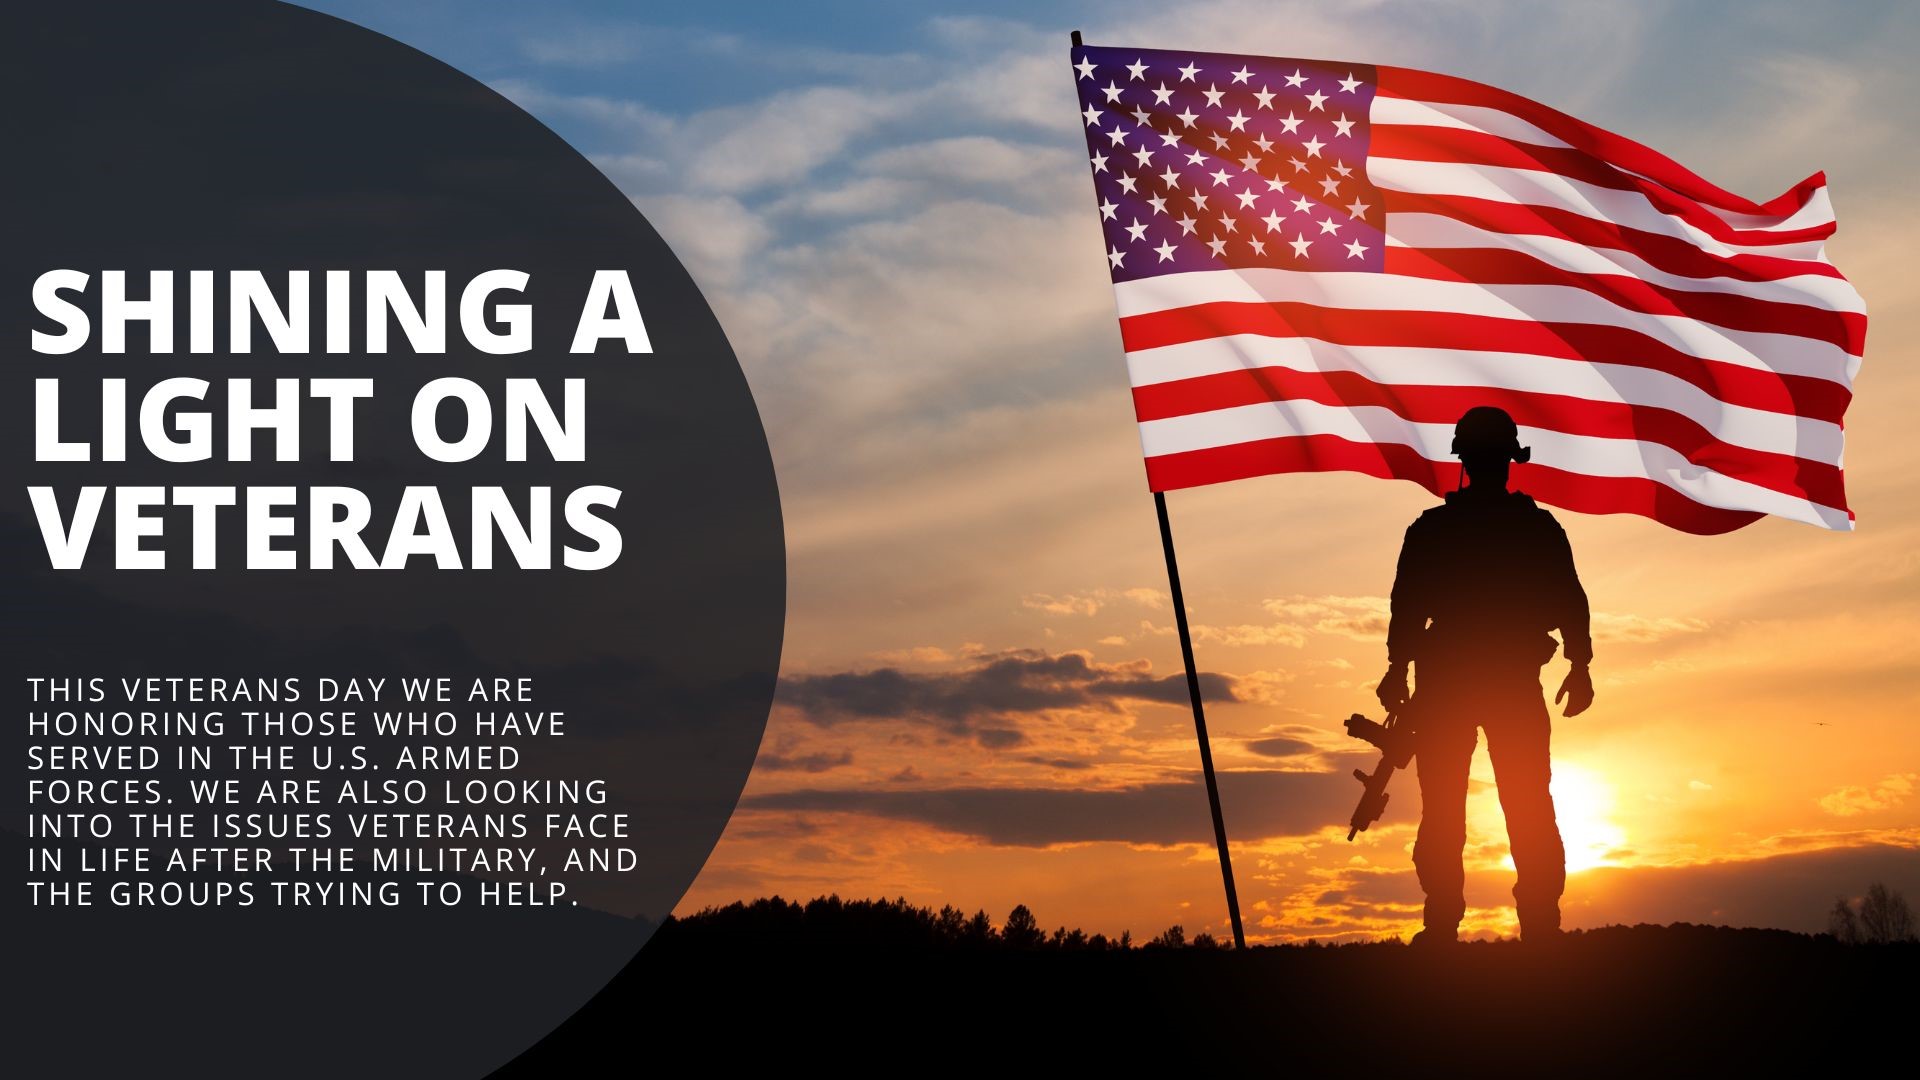 Veterans Day is a time to honor those who have served in the U.S. armed forces. We shed a light on the issues they face in life after the military.